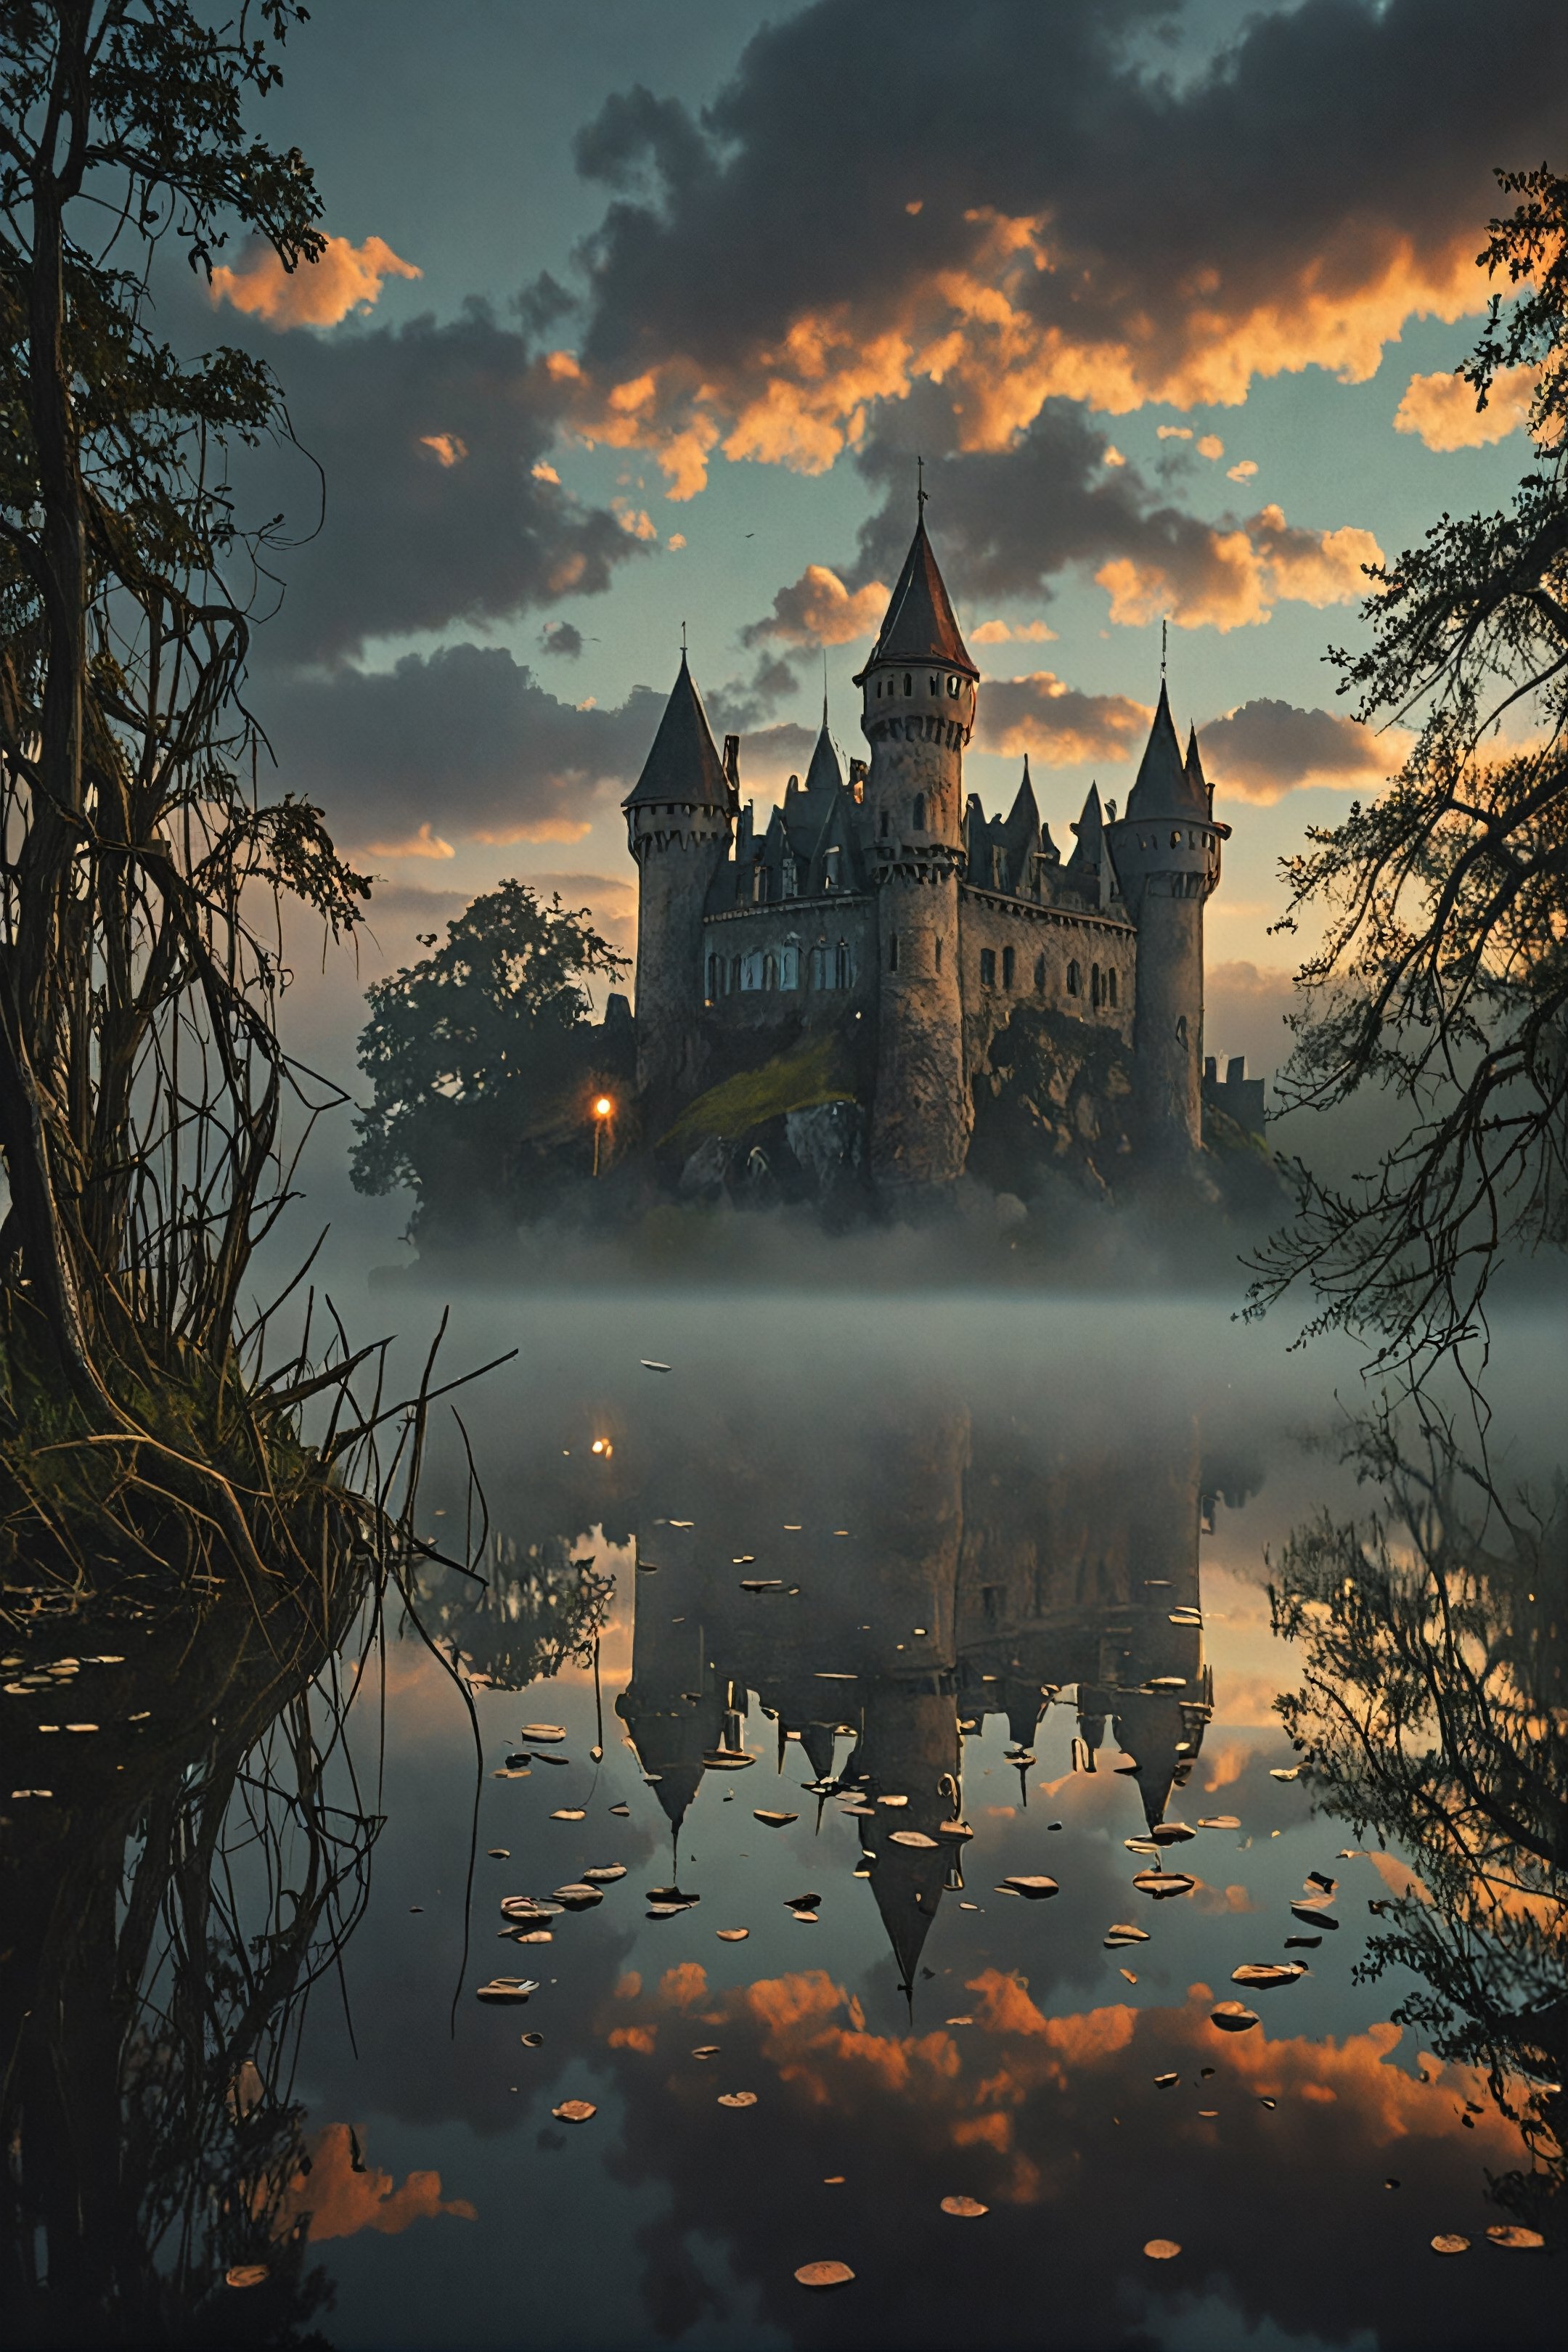 Horror-themed , create a picture of a mystical scene with a small castle in the middle of a calm lake. Create an extraordinary atmosphere with fog that envelops the castle and its surroundings. Highlight the reflection of the castle and the mist on the calm surface of the water. Illuminate the scenery with a dramatic sky showing celestial phenomena or intense cloud formations. Emphasize the magical and fantastical elements to create a captivating image that transports the viewer into a world of enchantment.
 , Ultra-HD-details, true to life, HDR image, High detail resolution, high detailed cloth, cinematic lighting, realistic, sharp focus, (very detailed), ((4K HQ)), depth of field, f/1.2, Leica, 8K HDR, High contrast, bokeh, realistic shadows, vignette, epic, . Eerie, unsettling, dark, spooky, suspenseful, grim, highly detailed
